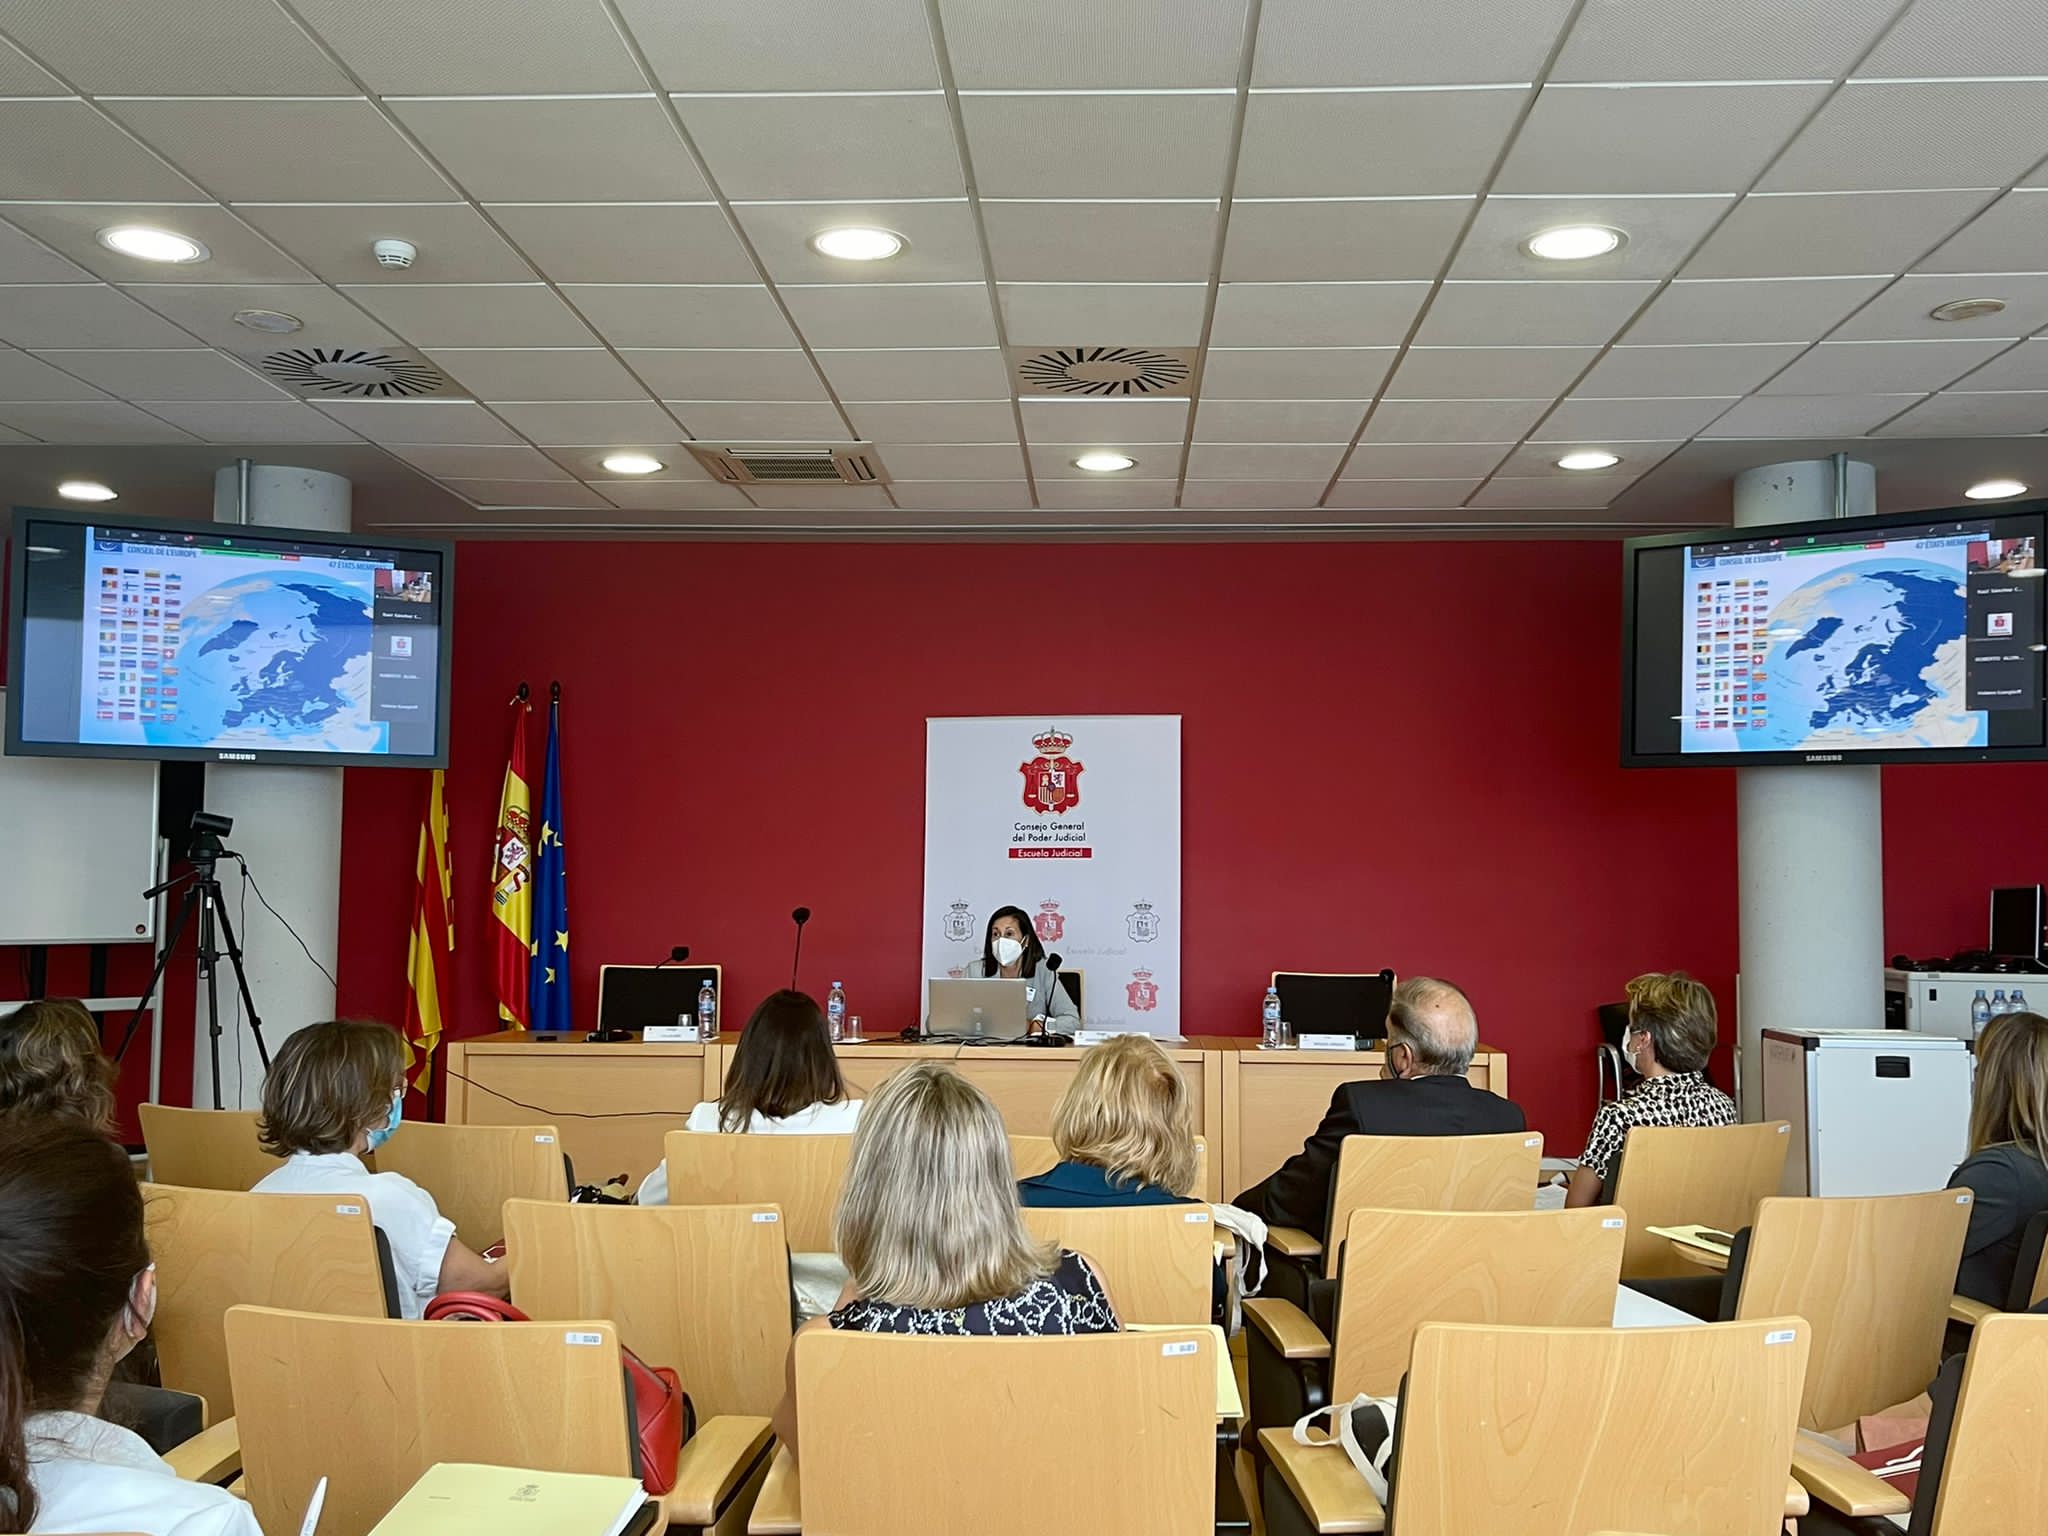 HELP Radicalisation and terrorism prevention course launched in Barcelona